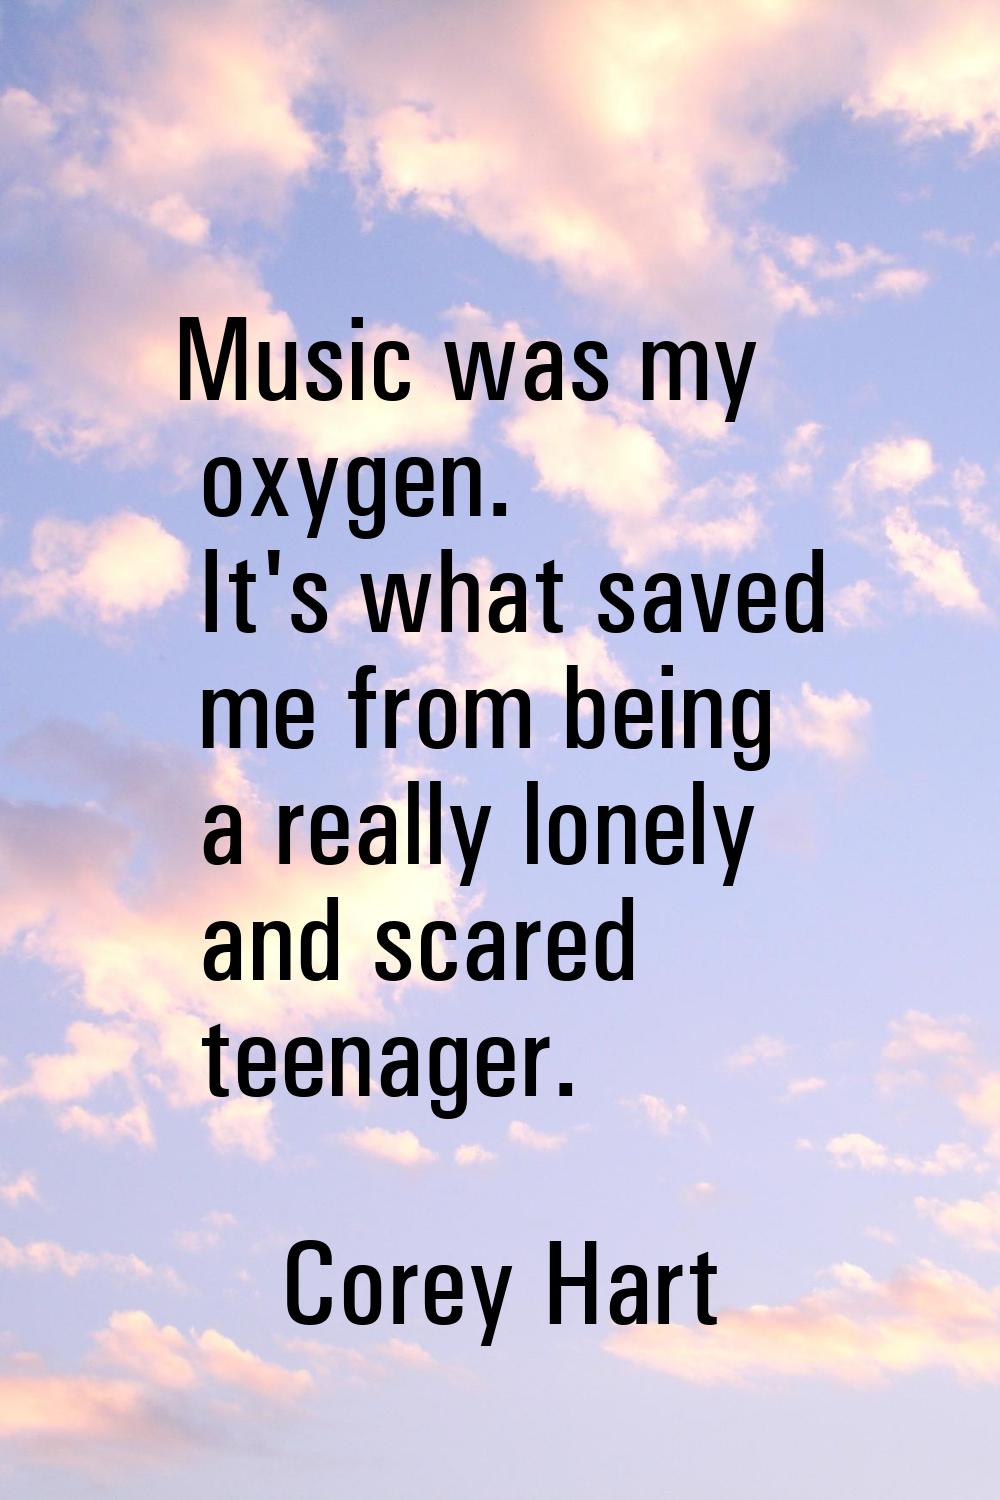 Music was my oxygen. It's what saved me from being a really lonely and scared teenager.